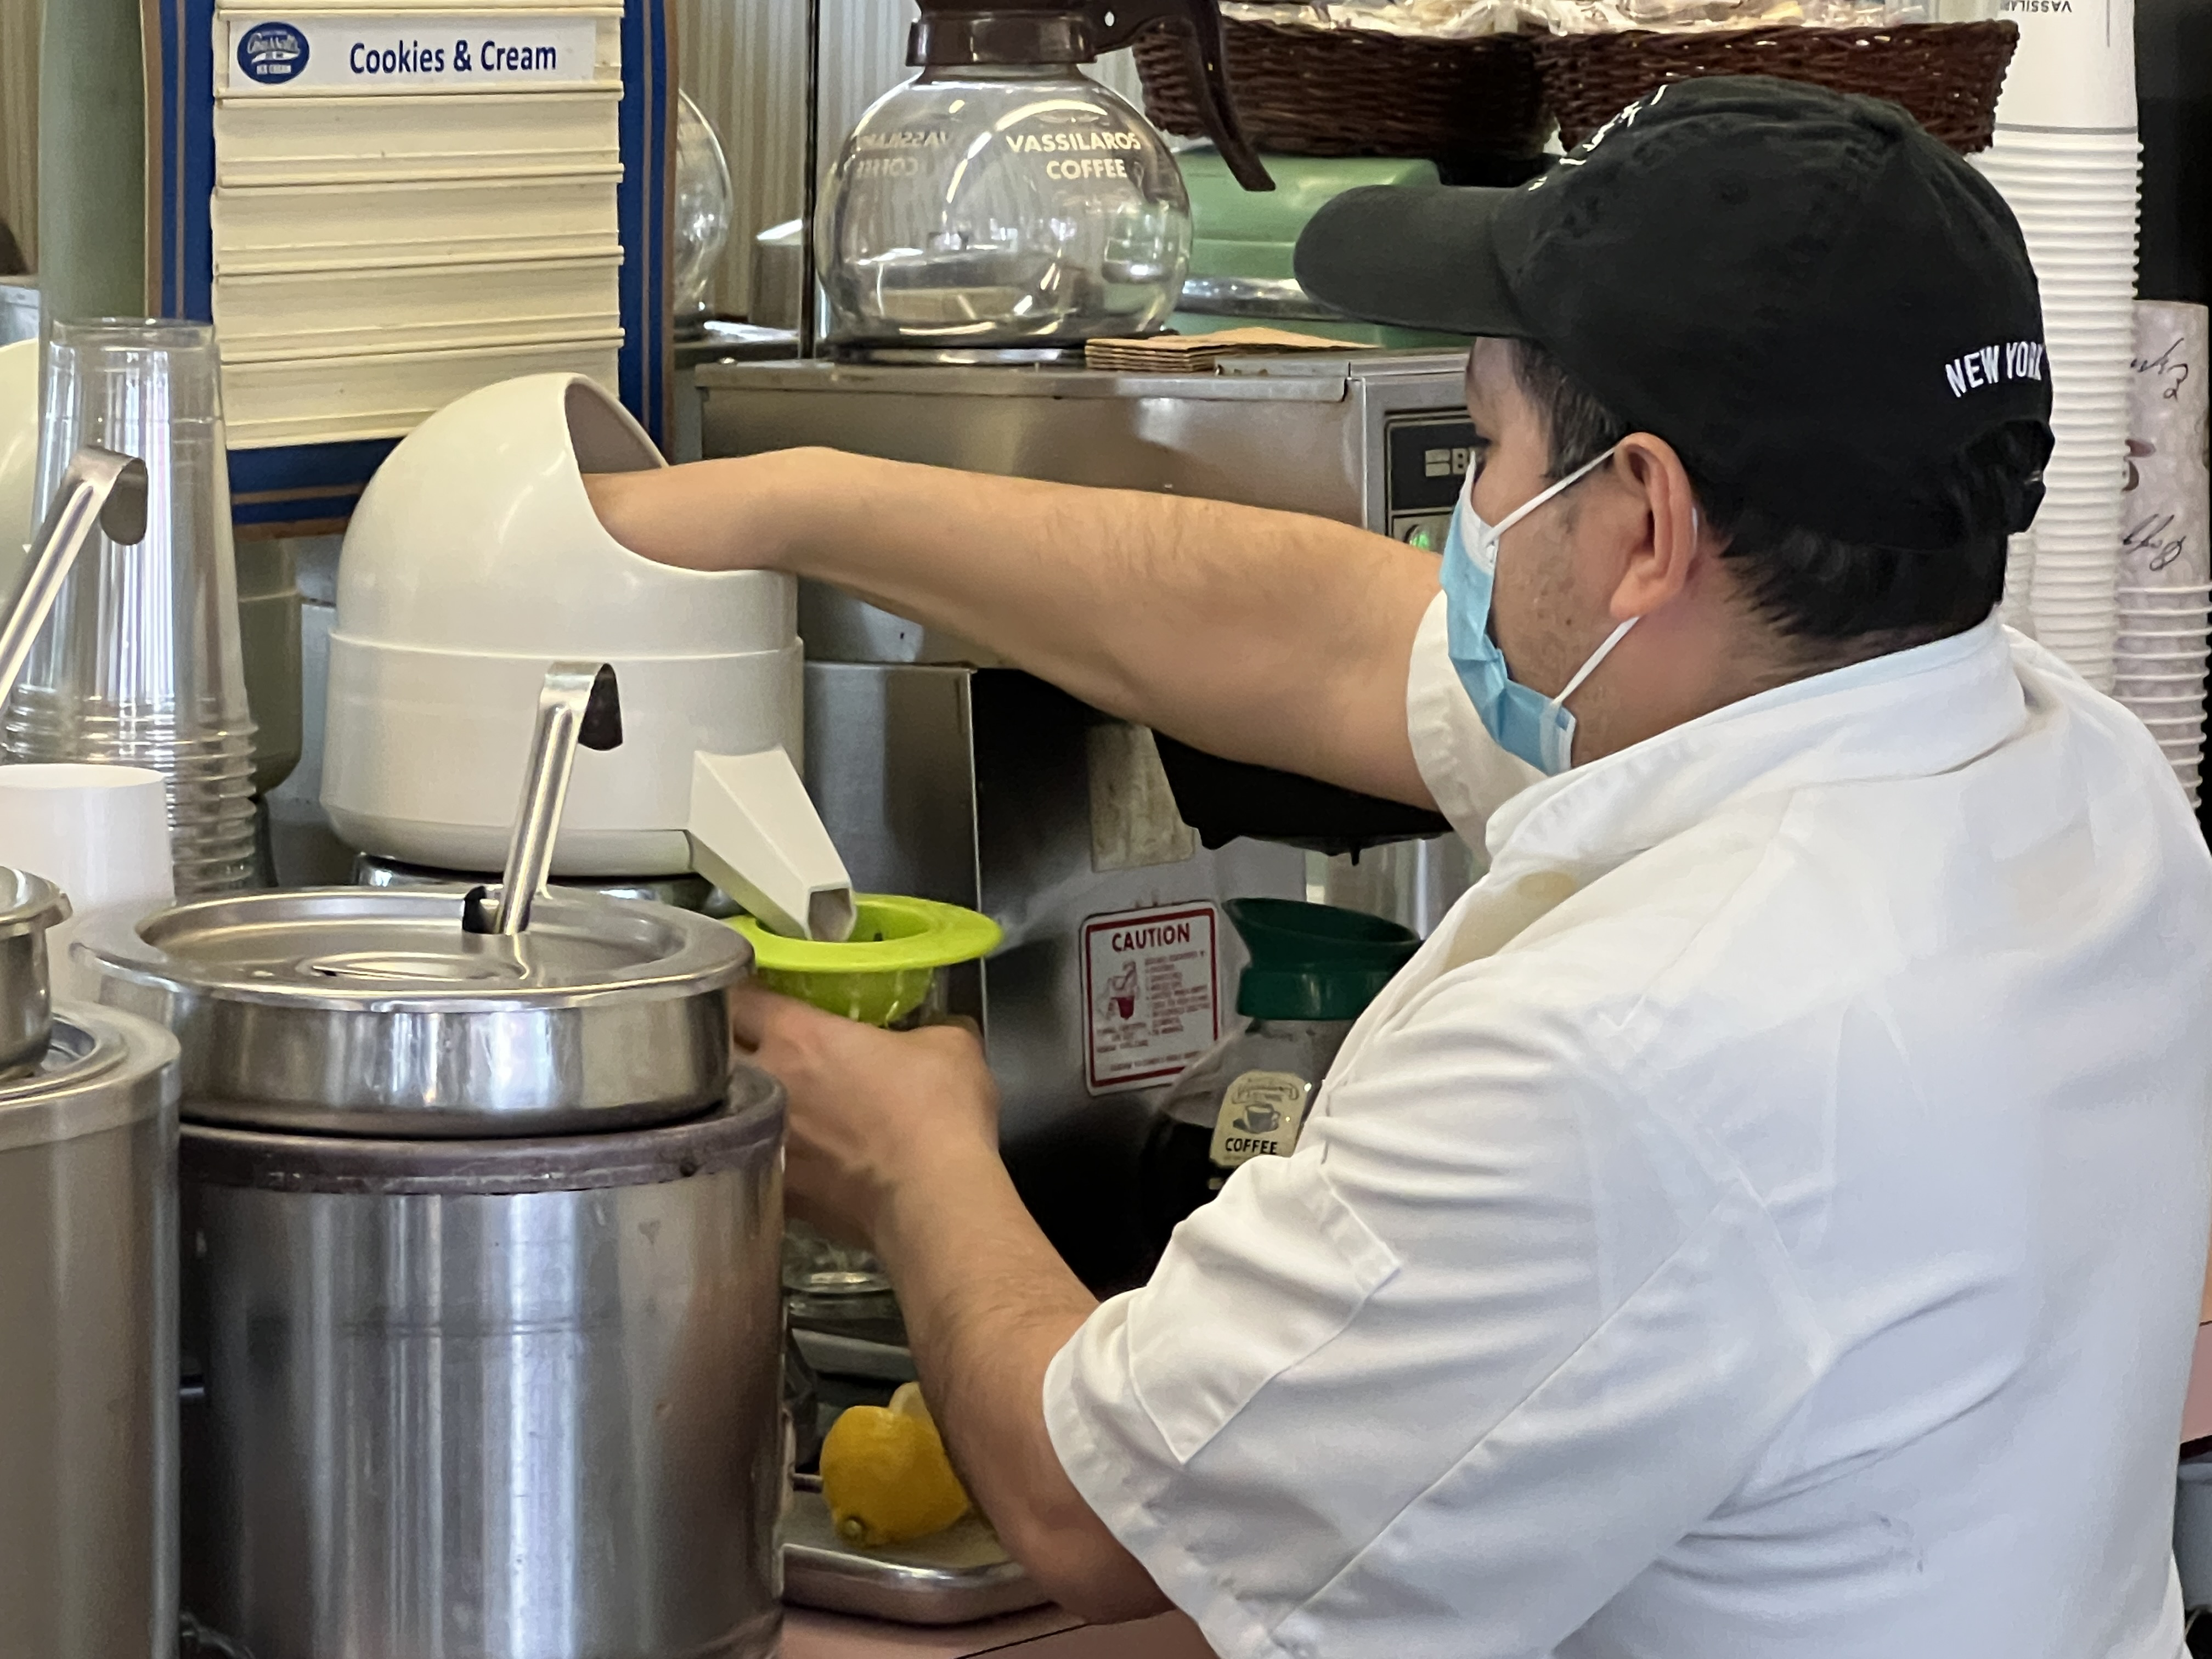 Fresh squeezed lemonade is made-to-order at Lexington Candy Shop/Upper East Site